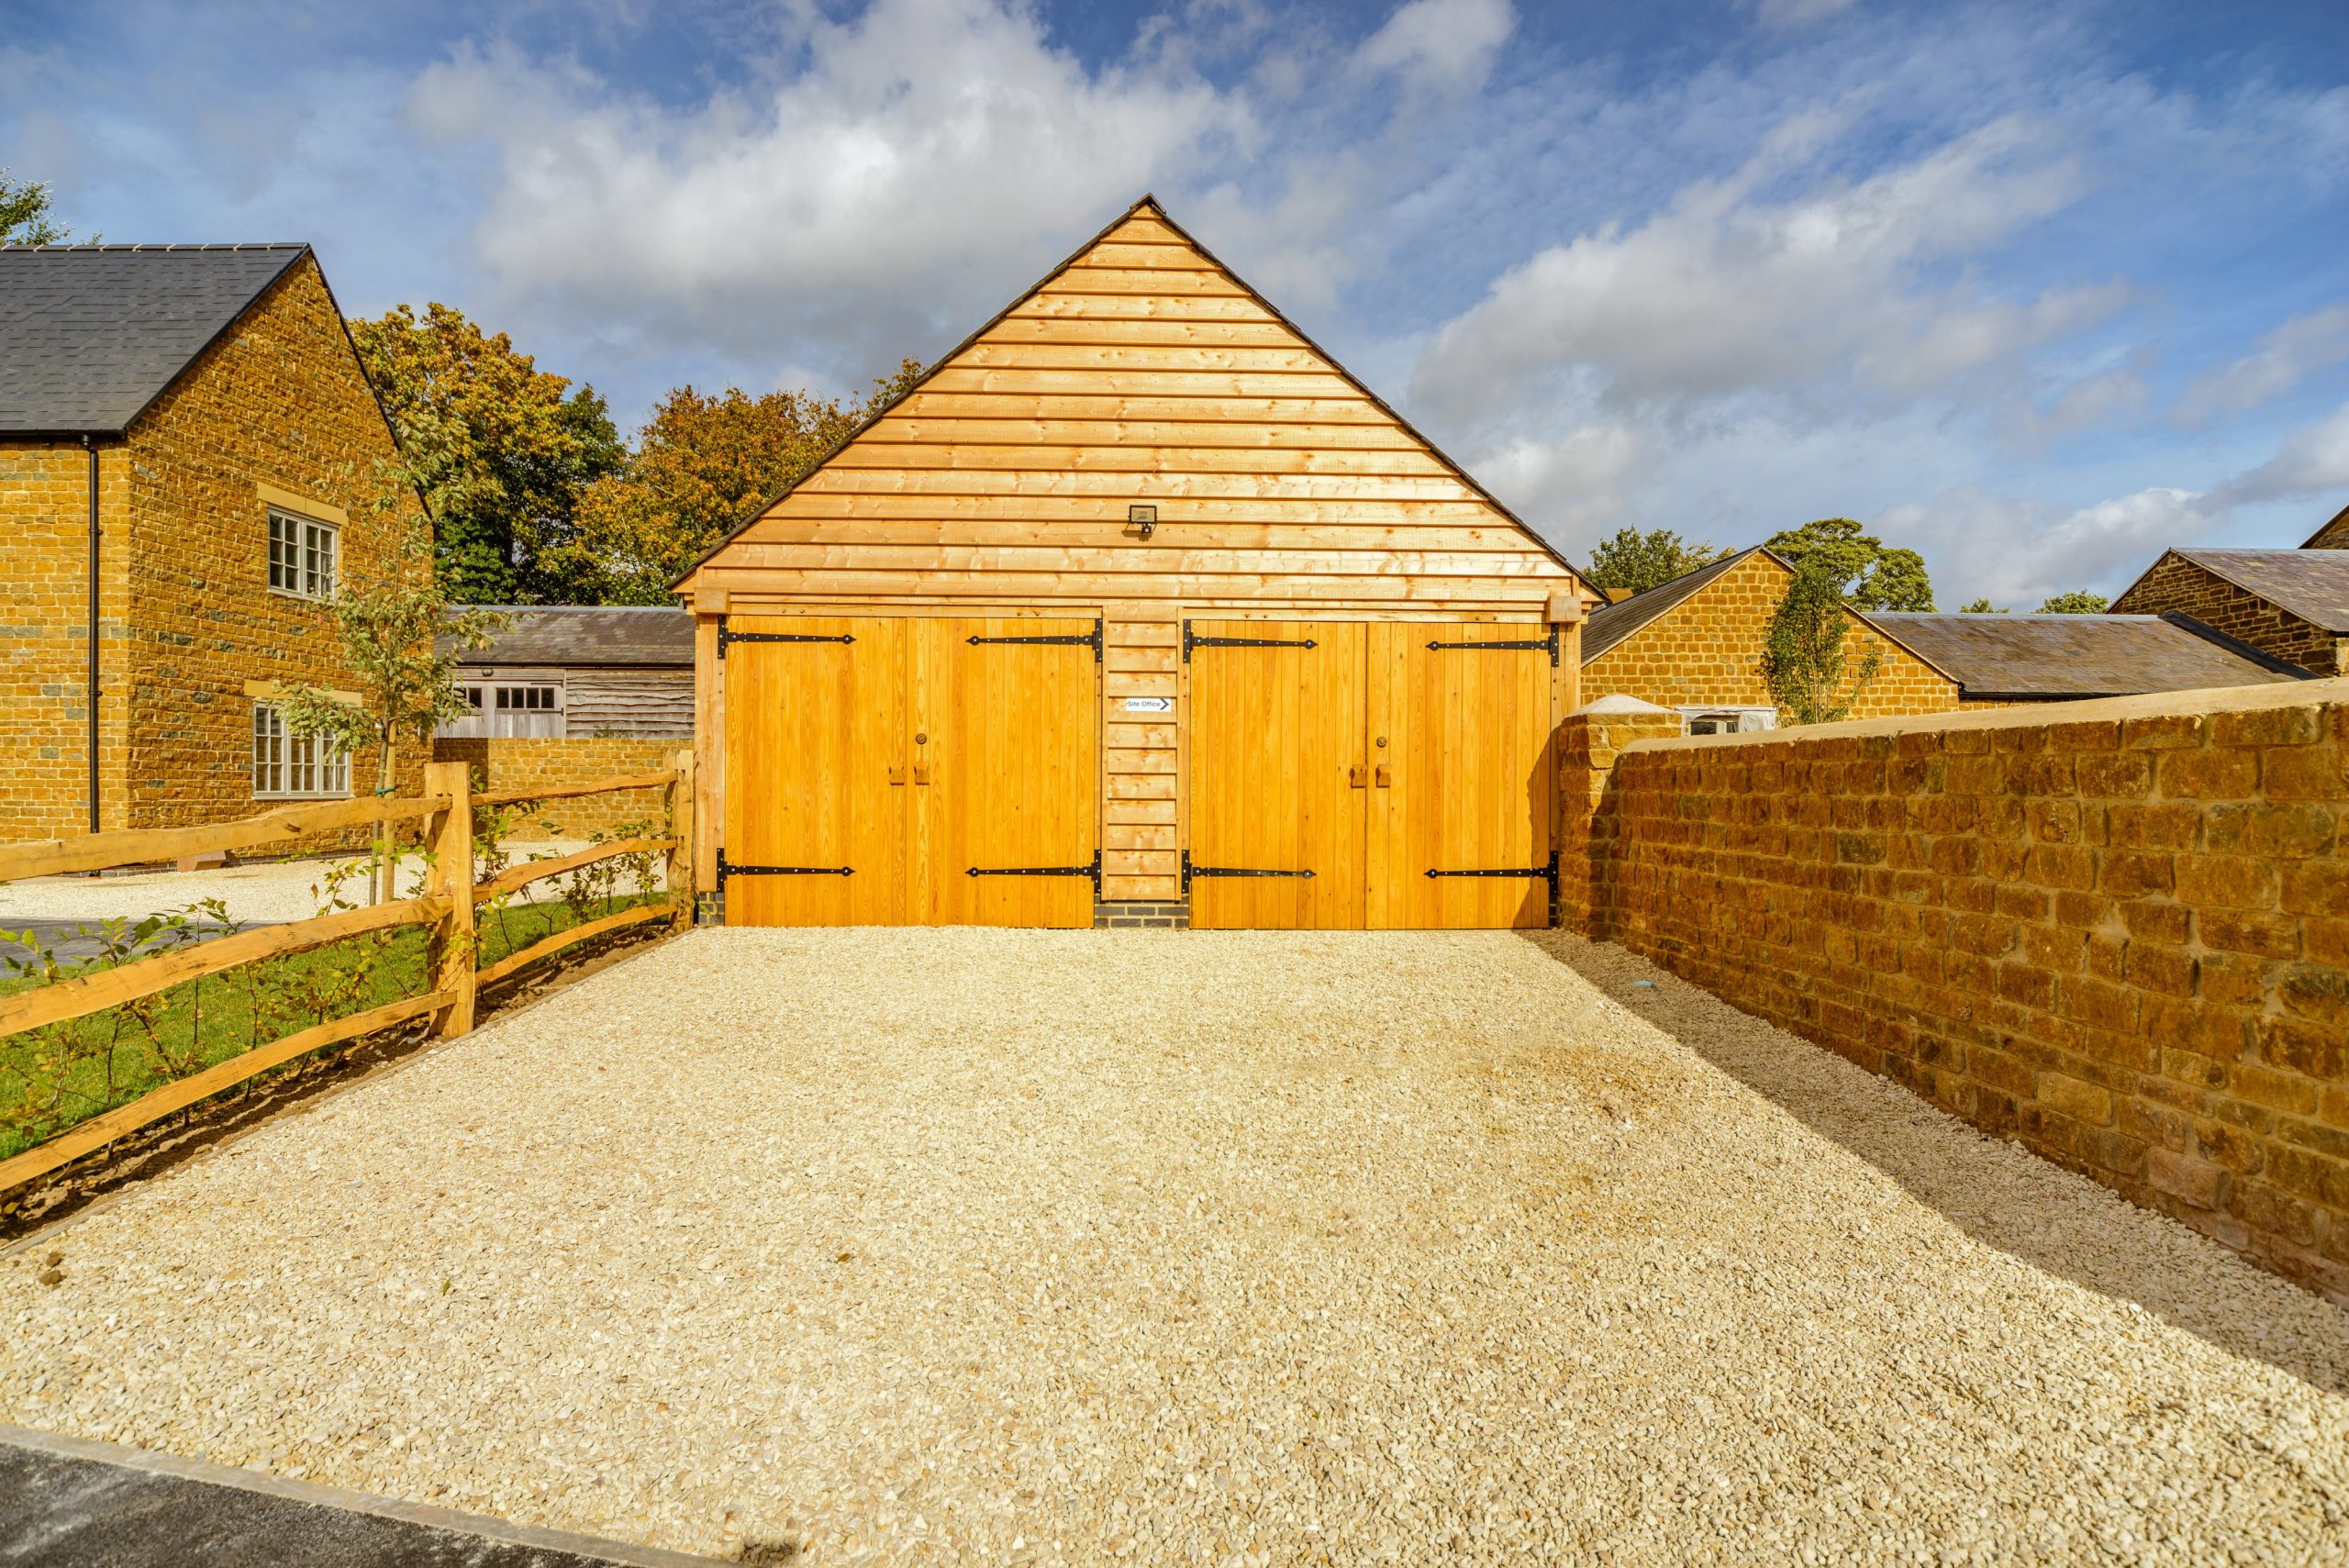 large 2 bay wooden oak garage with a gravel driveway in the foreground